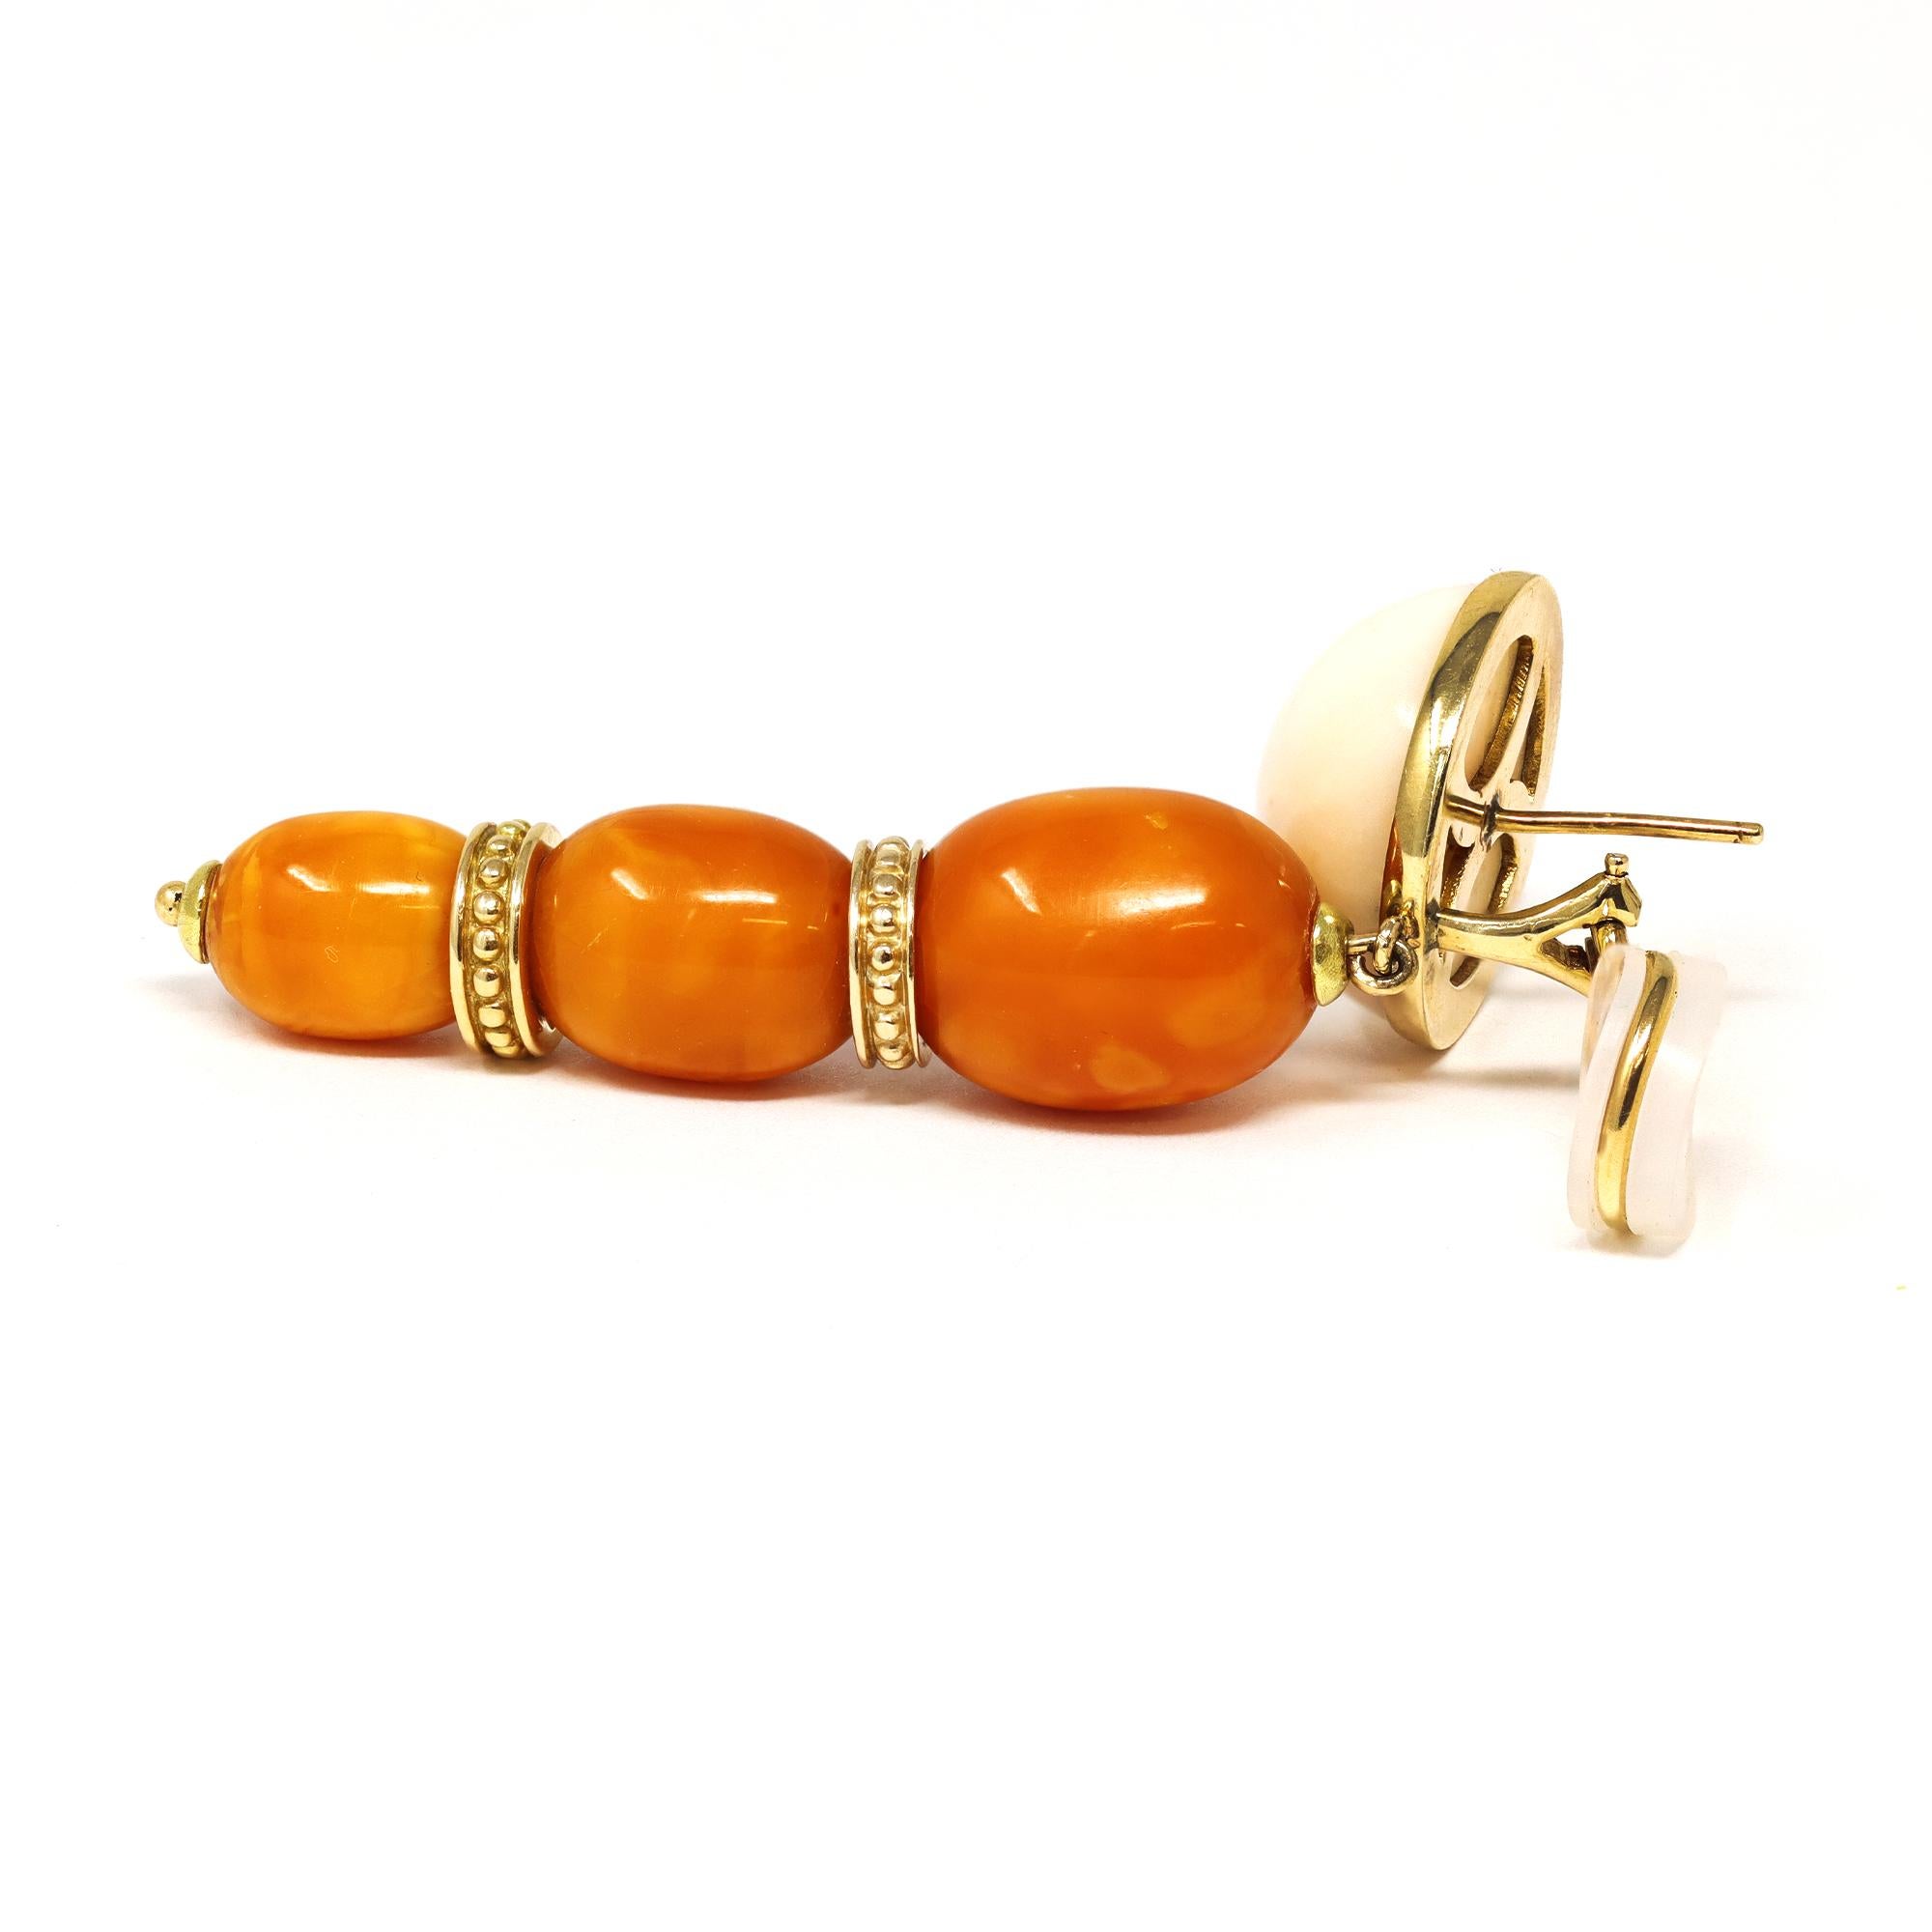 Bead Natural Butter-scotch Amber & White Coral earring in 14k